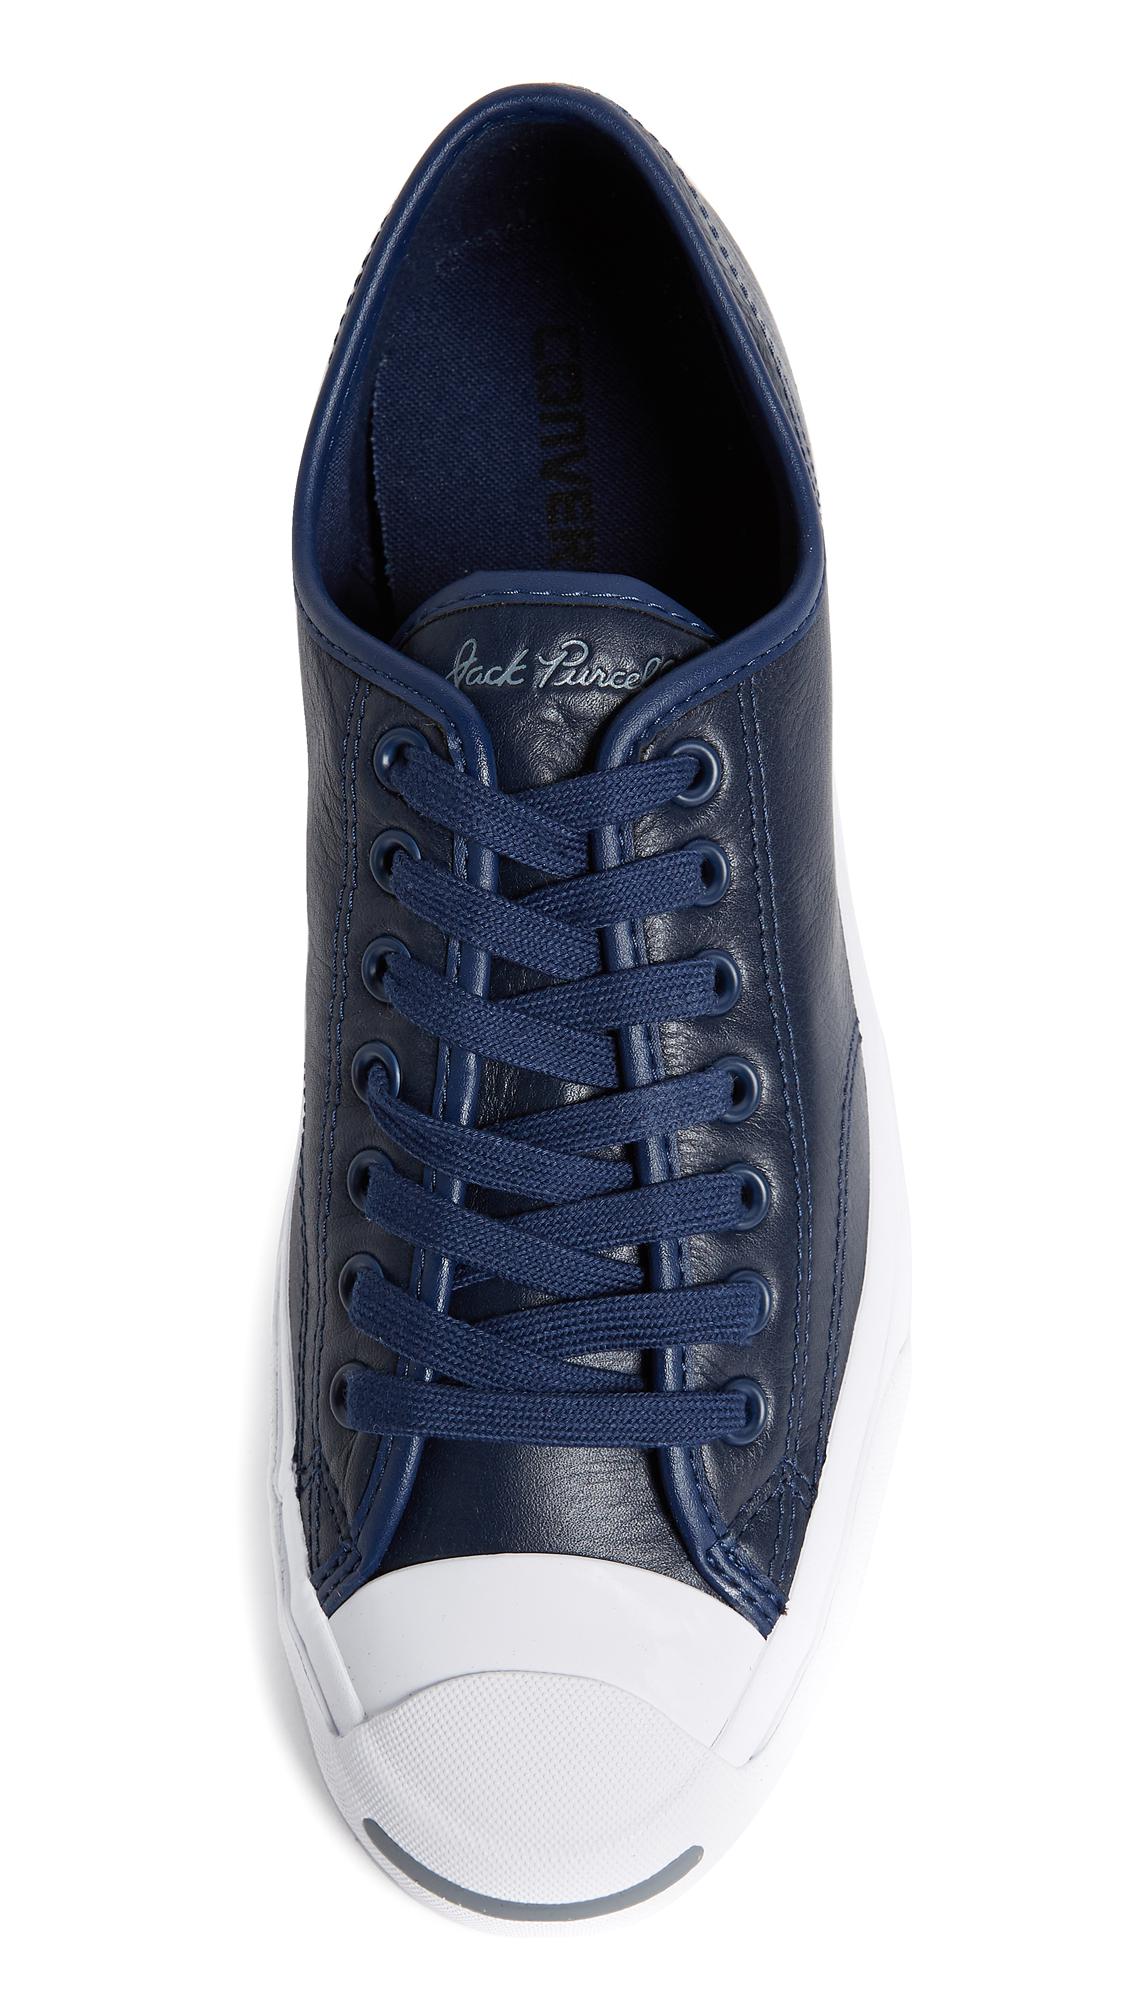 converse jack purcell blue leather, OFF 